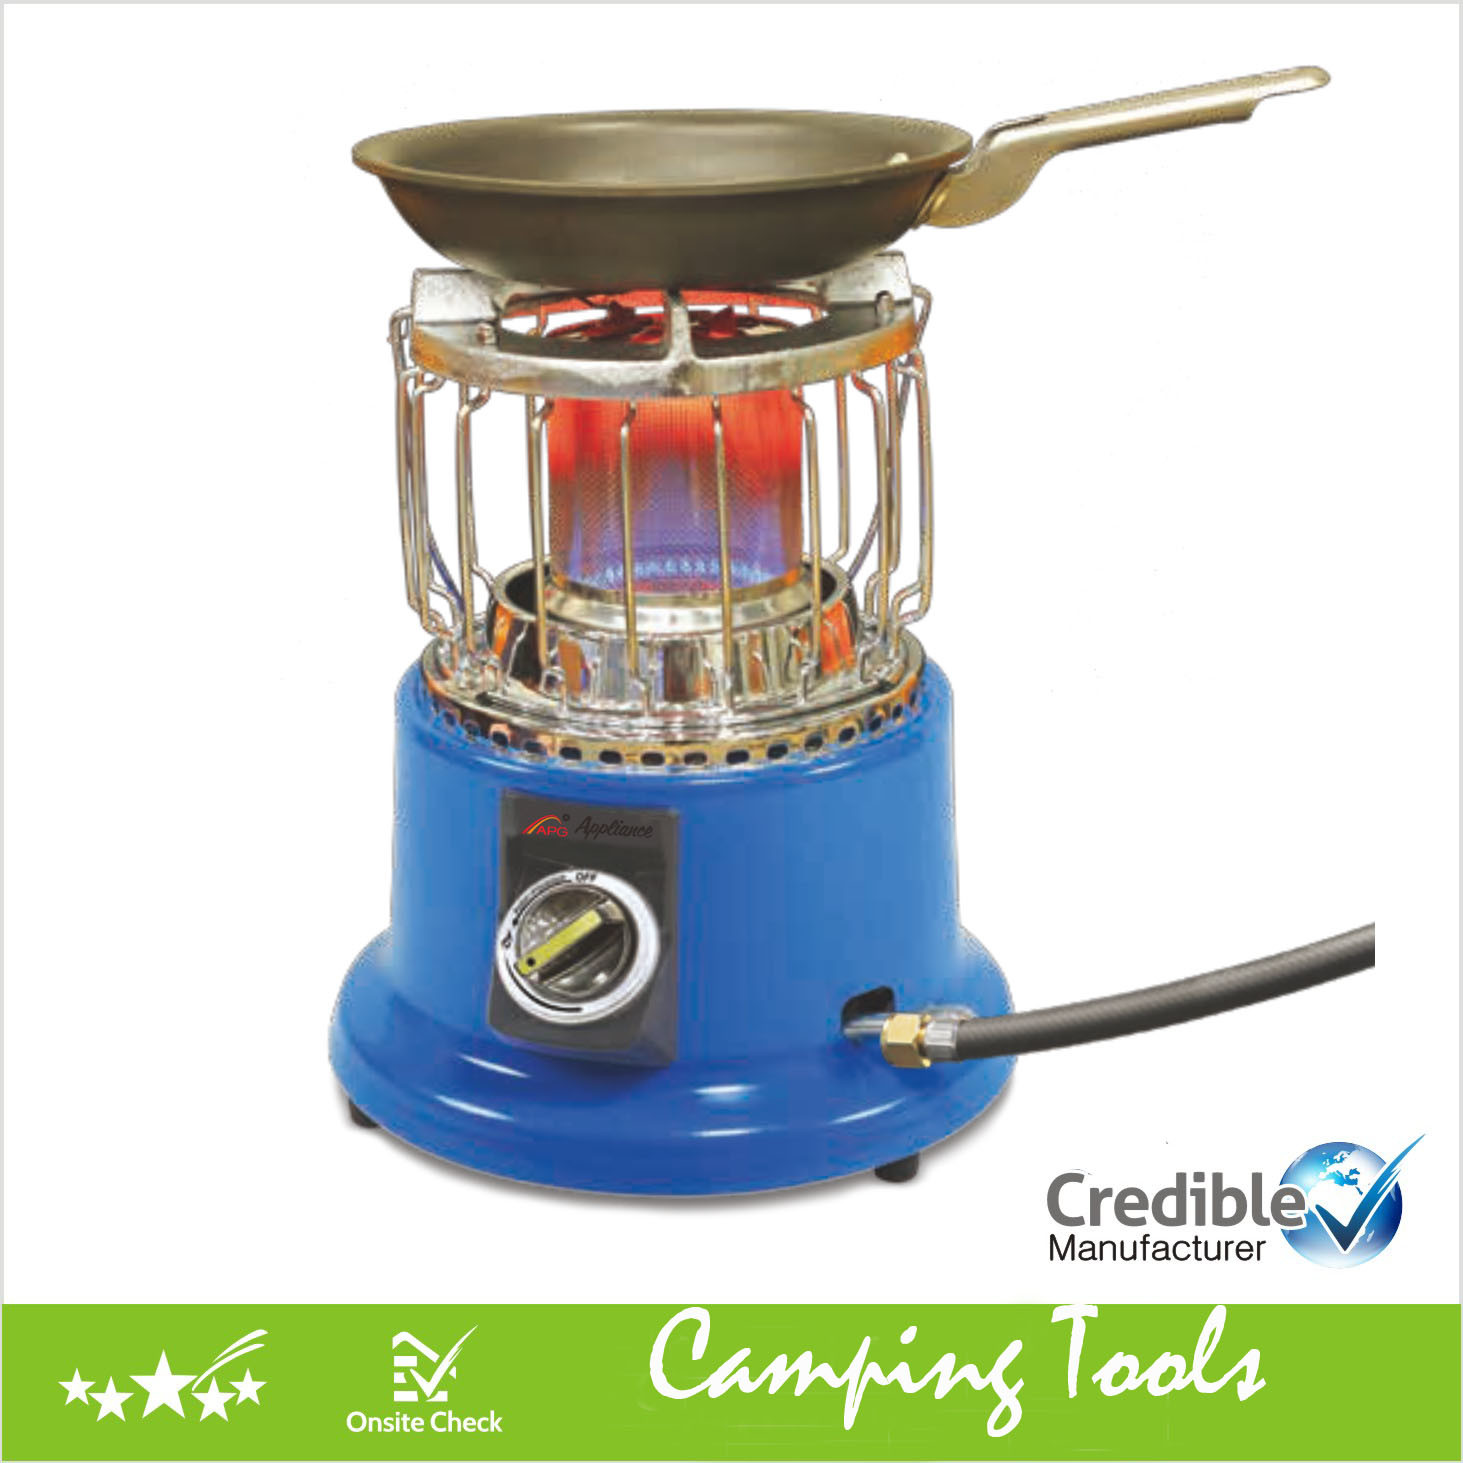 Portable 2-in-1 Gas Camping Heater